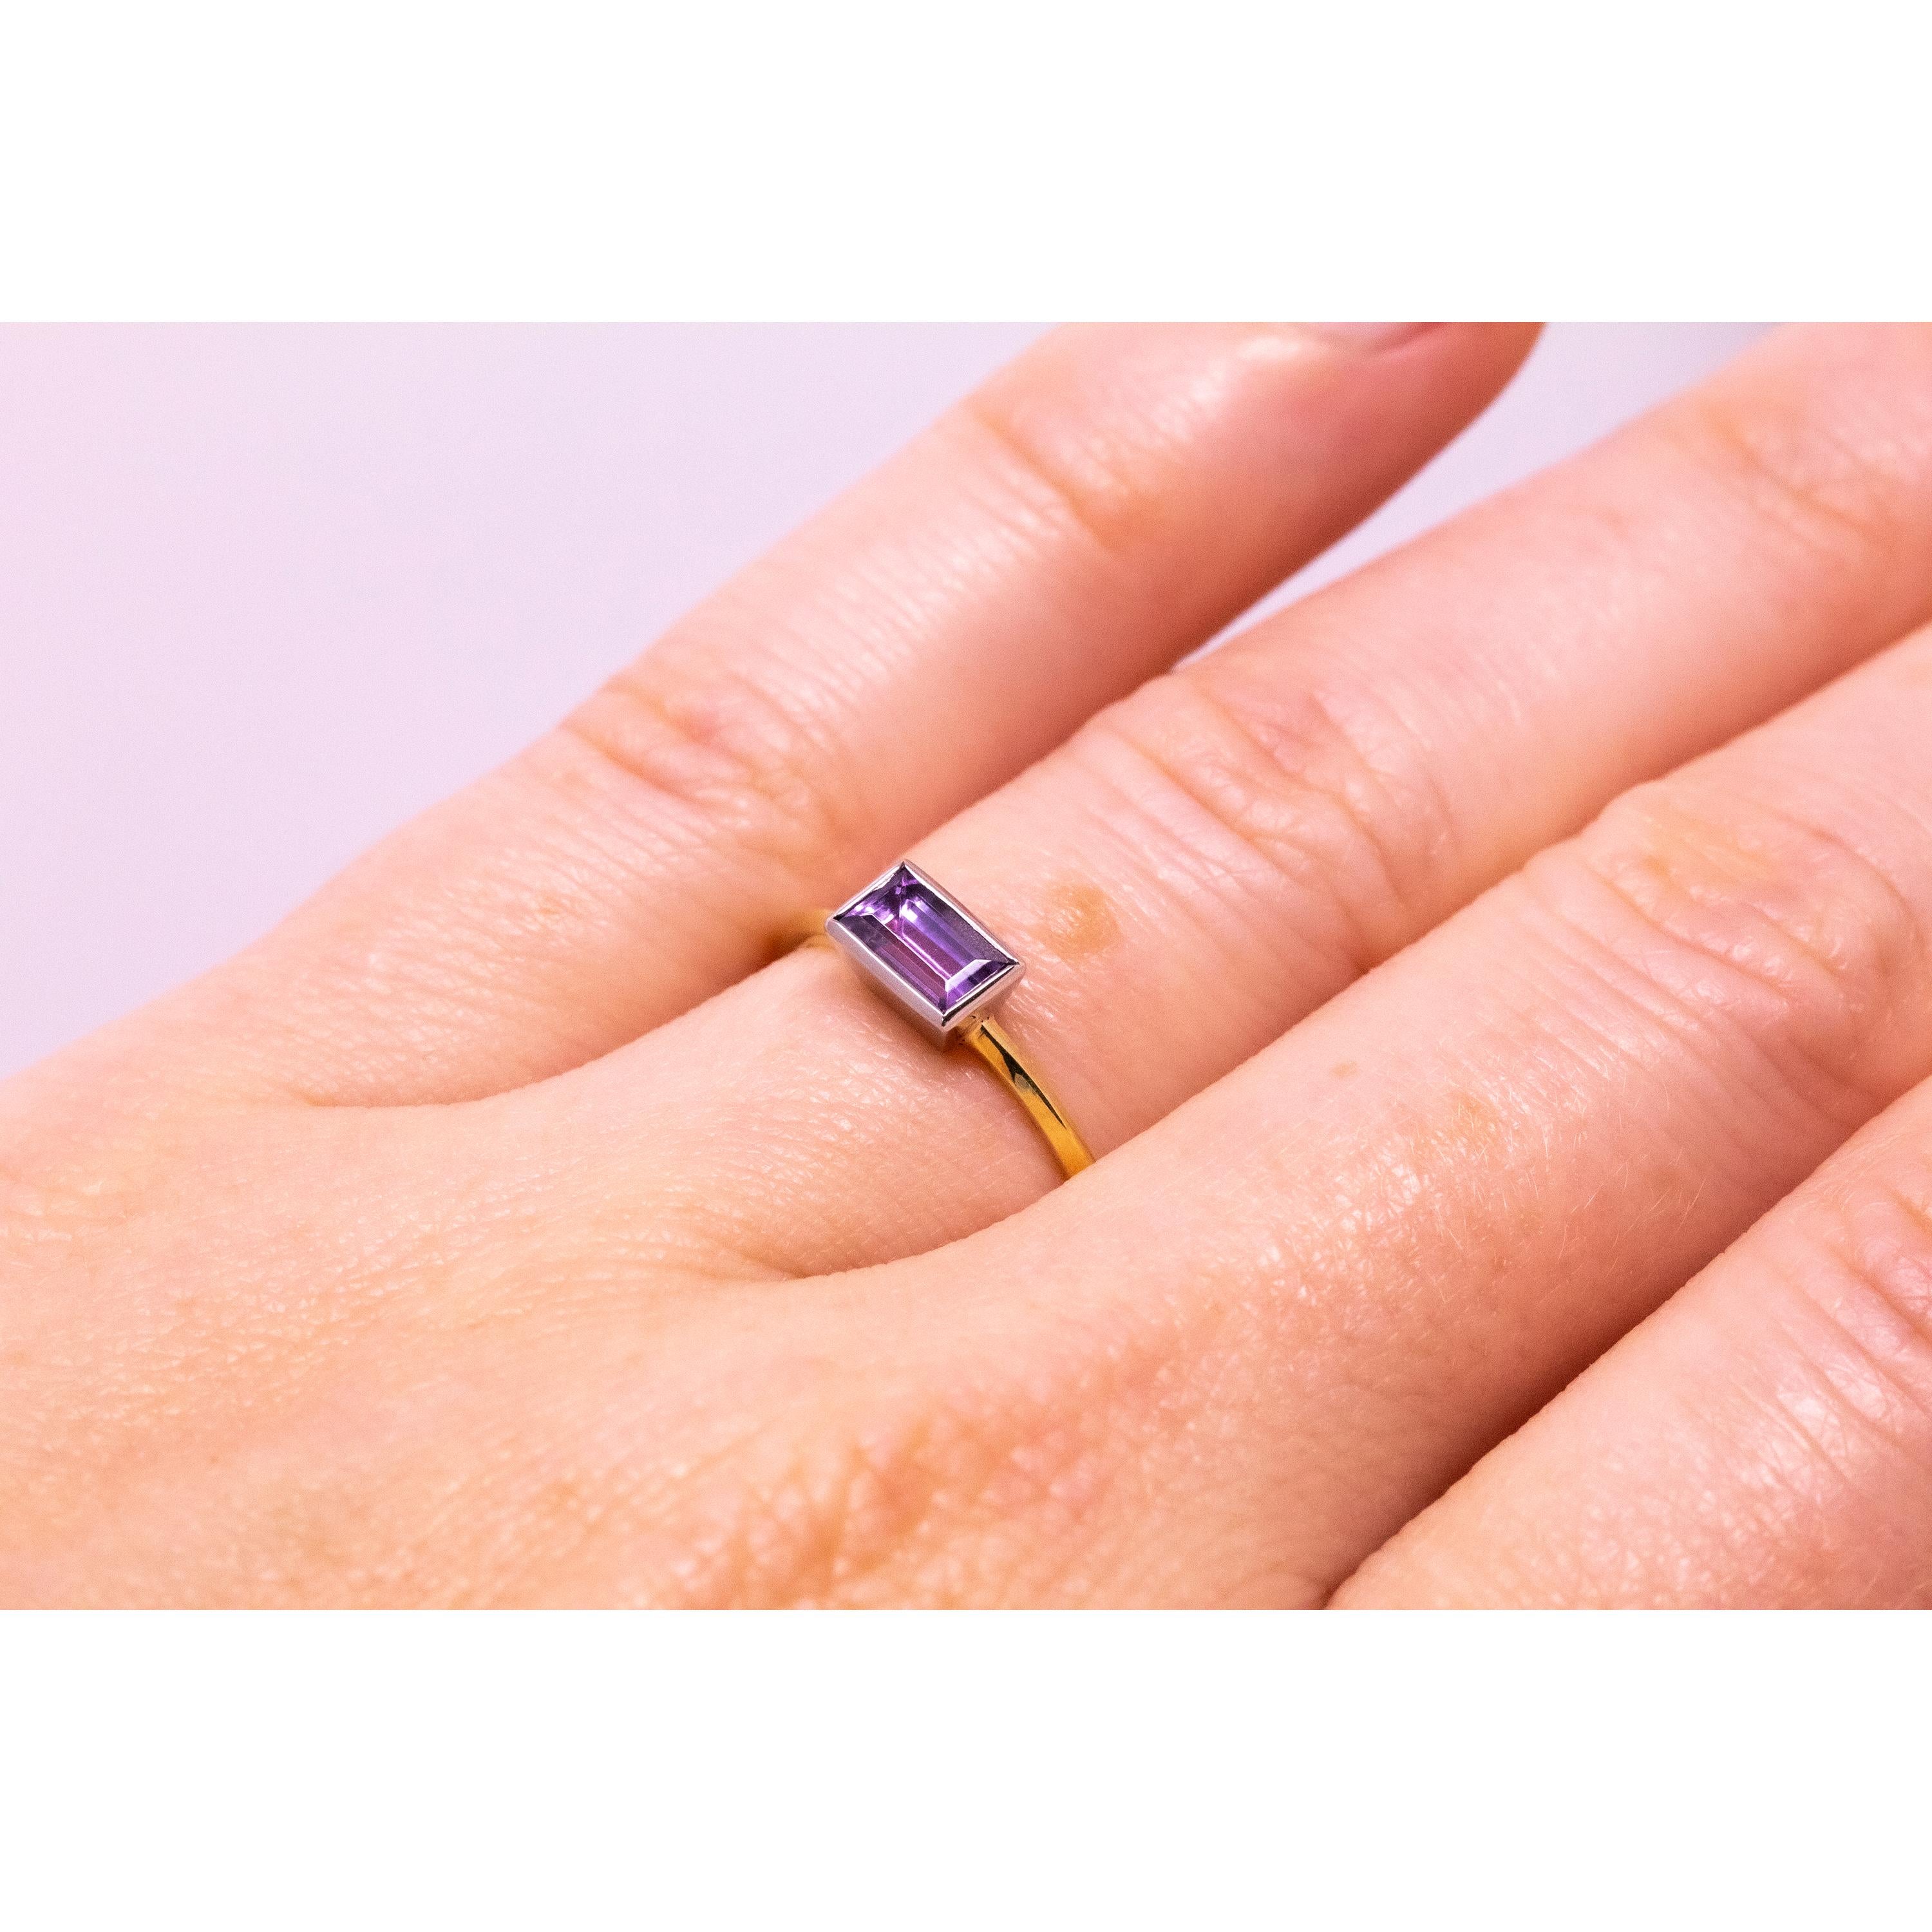 The striking and rare unheated, fancy color pink-lavender tanzanite sparkles perfectly in this fresh and modern ring. The eye-popping and unexpected hue is highlighted in a clean-lined emerald cut. This rare color of tanzanite is, by definition,